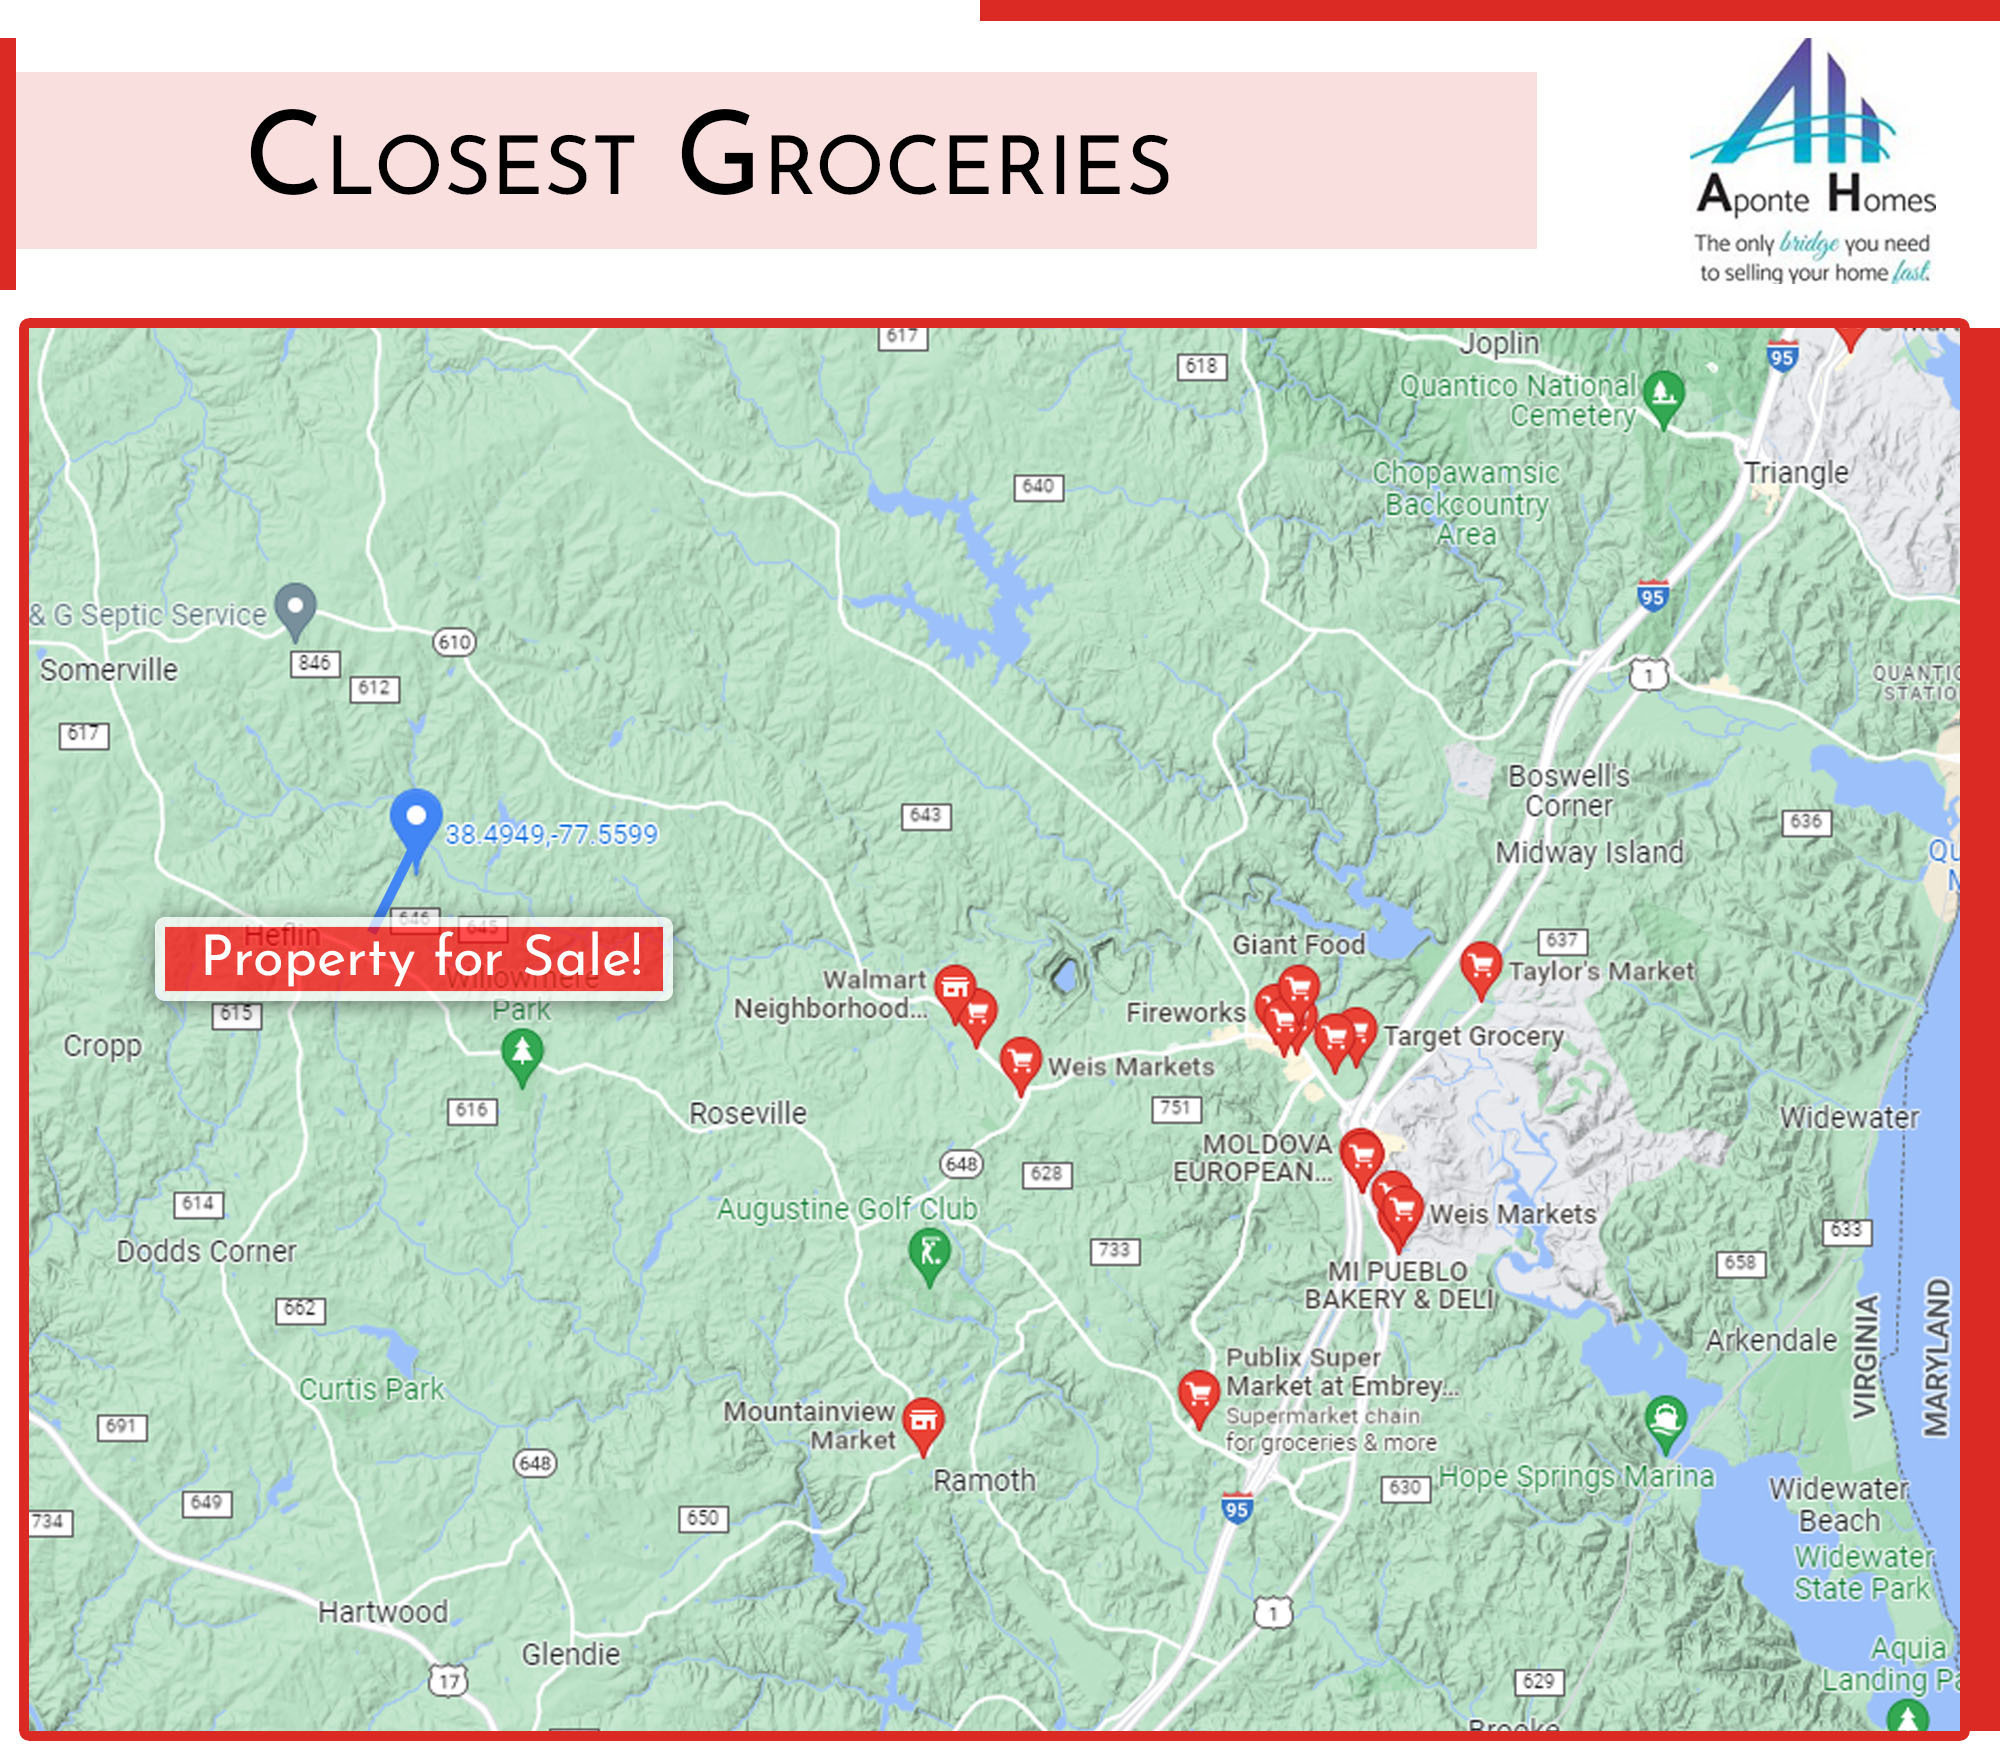 Closest Groceries